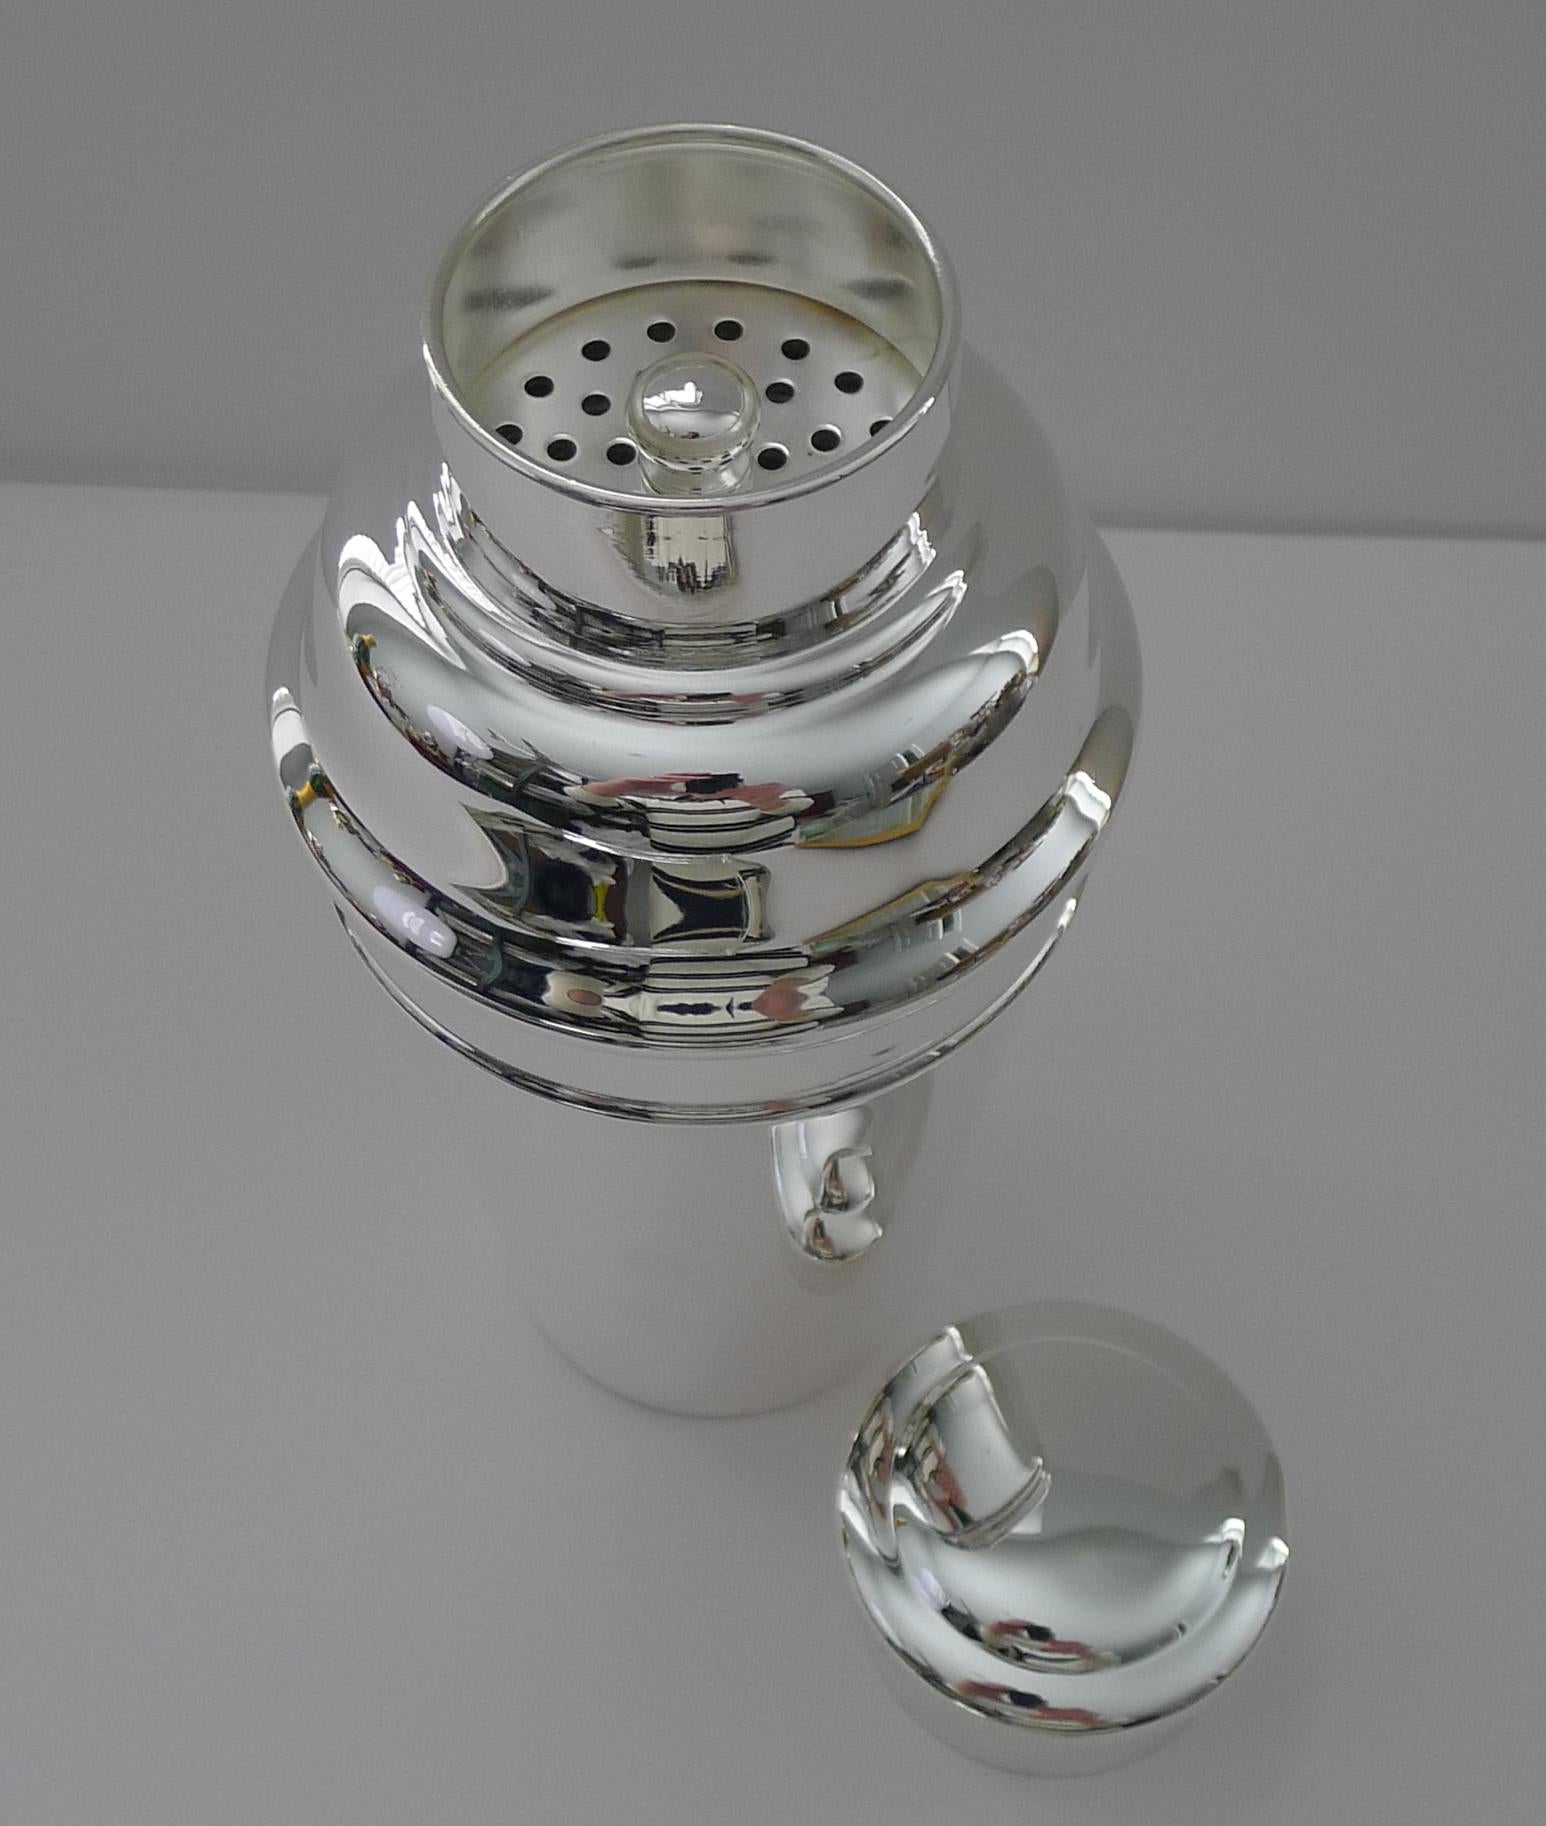 Smart Art Deco Shaker by William Suckling c.1930 - 1 1/4 Pints In Good Condition For Sale In Bath, GB